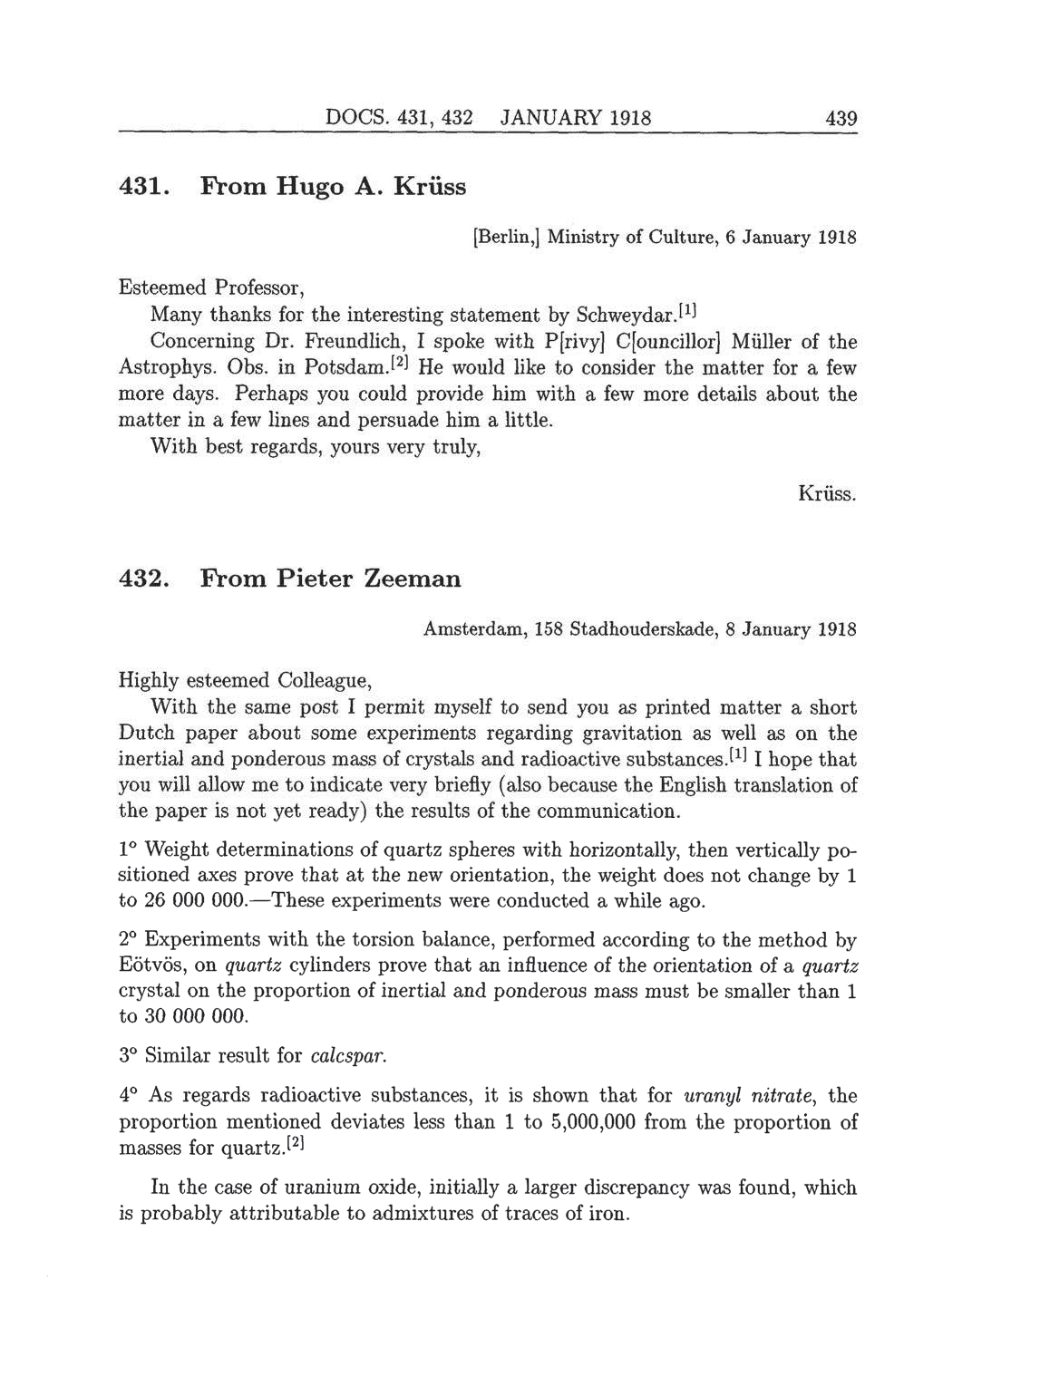 Volume 8: The Berlin Years: Correspondence, 1914-1918 (English translation supplement) page 439